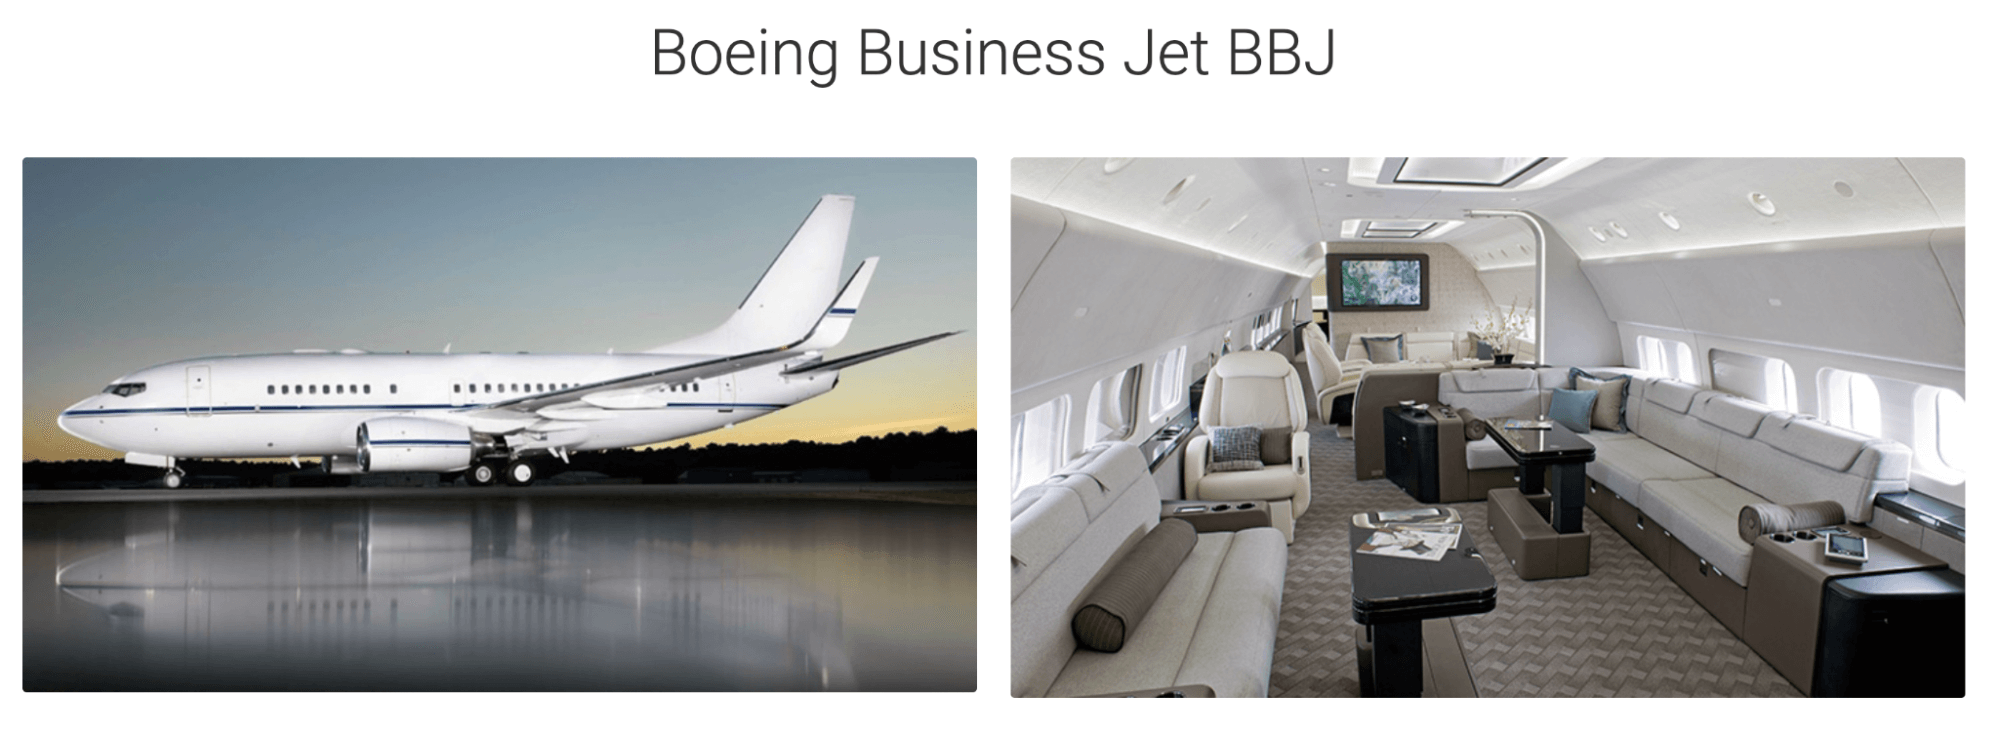 An exterior and interior picture of the corporate jet Boeing Business Jet BBJ.